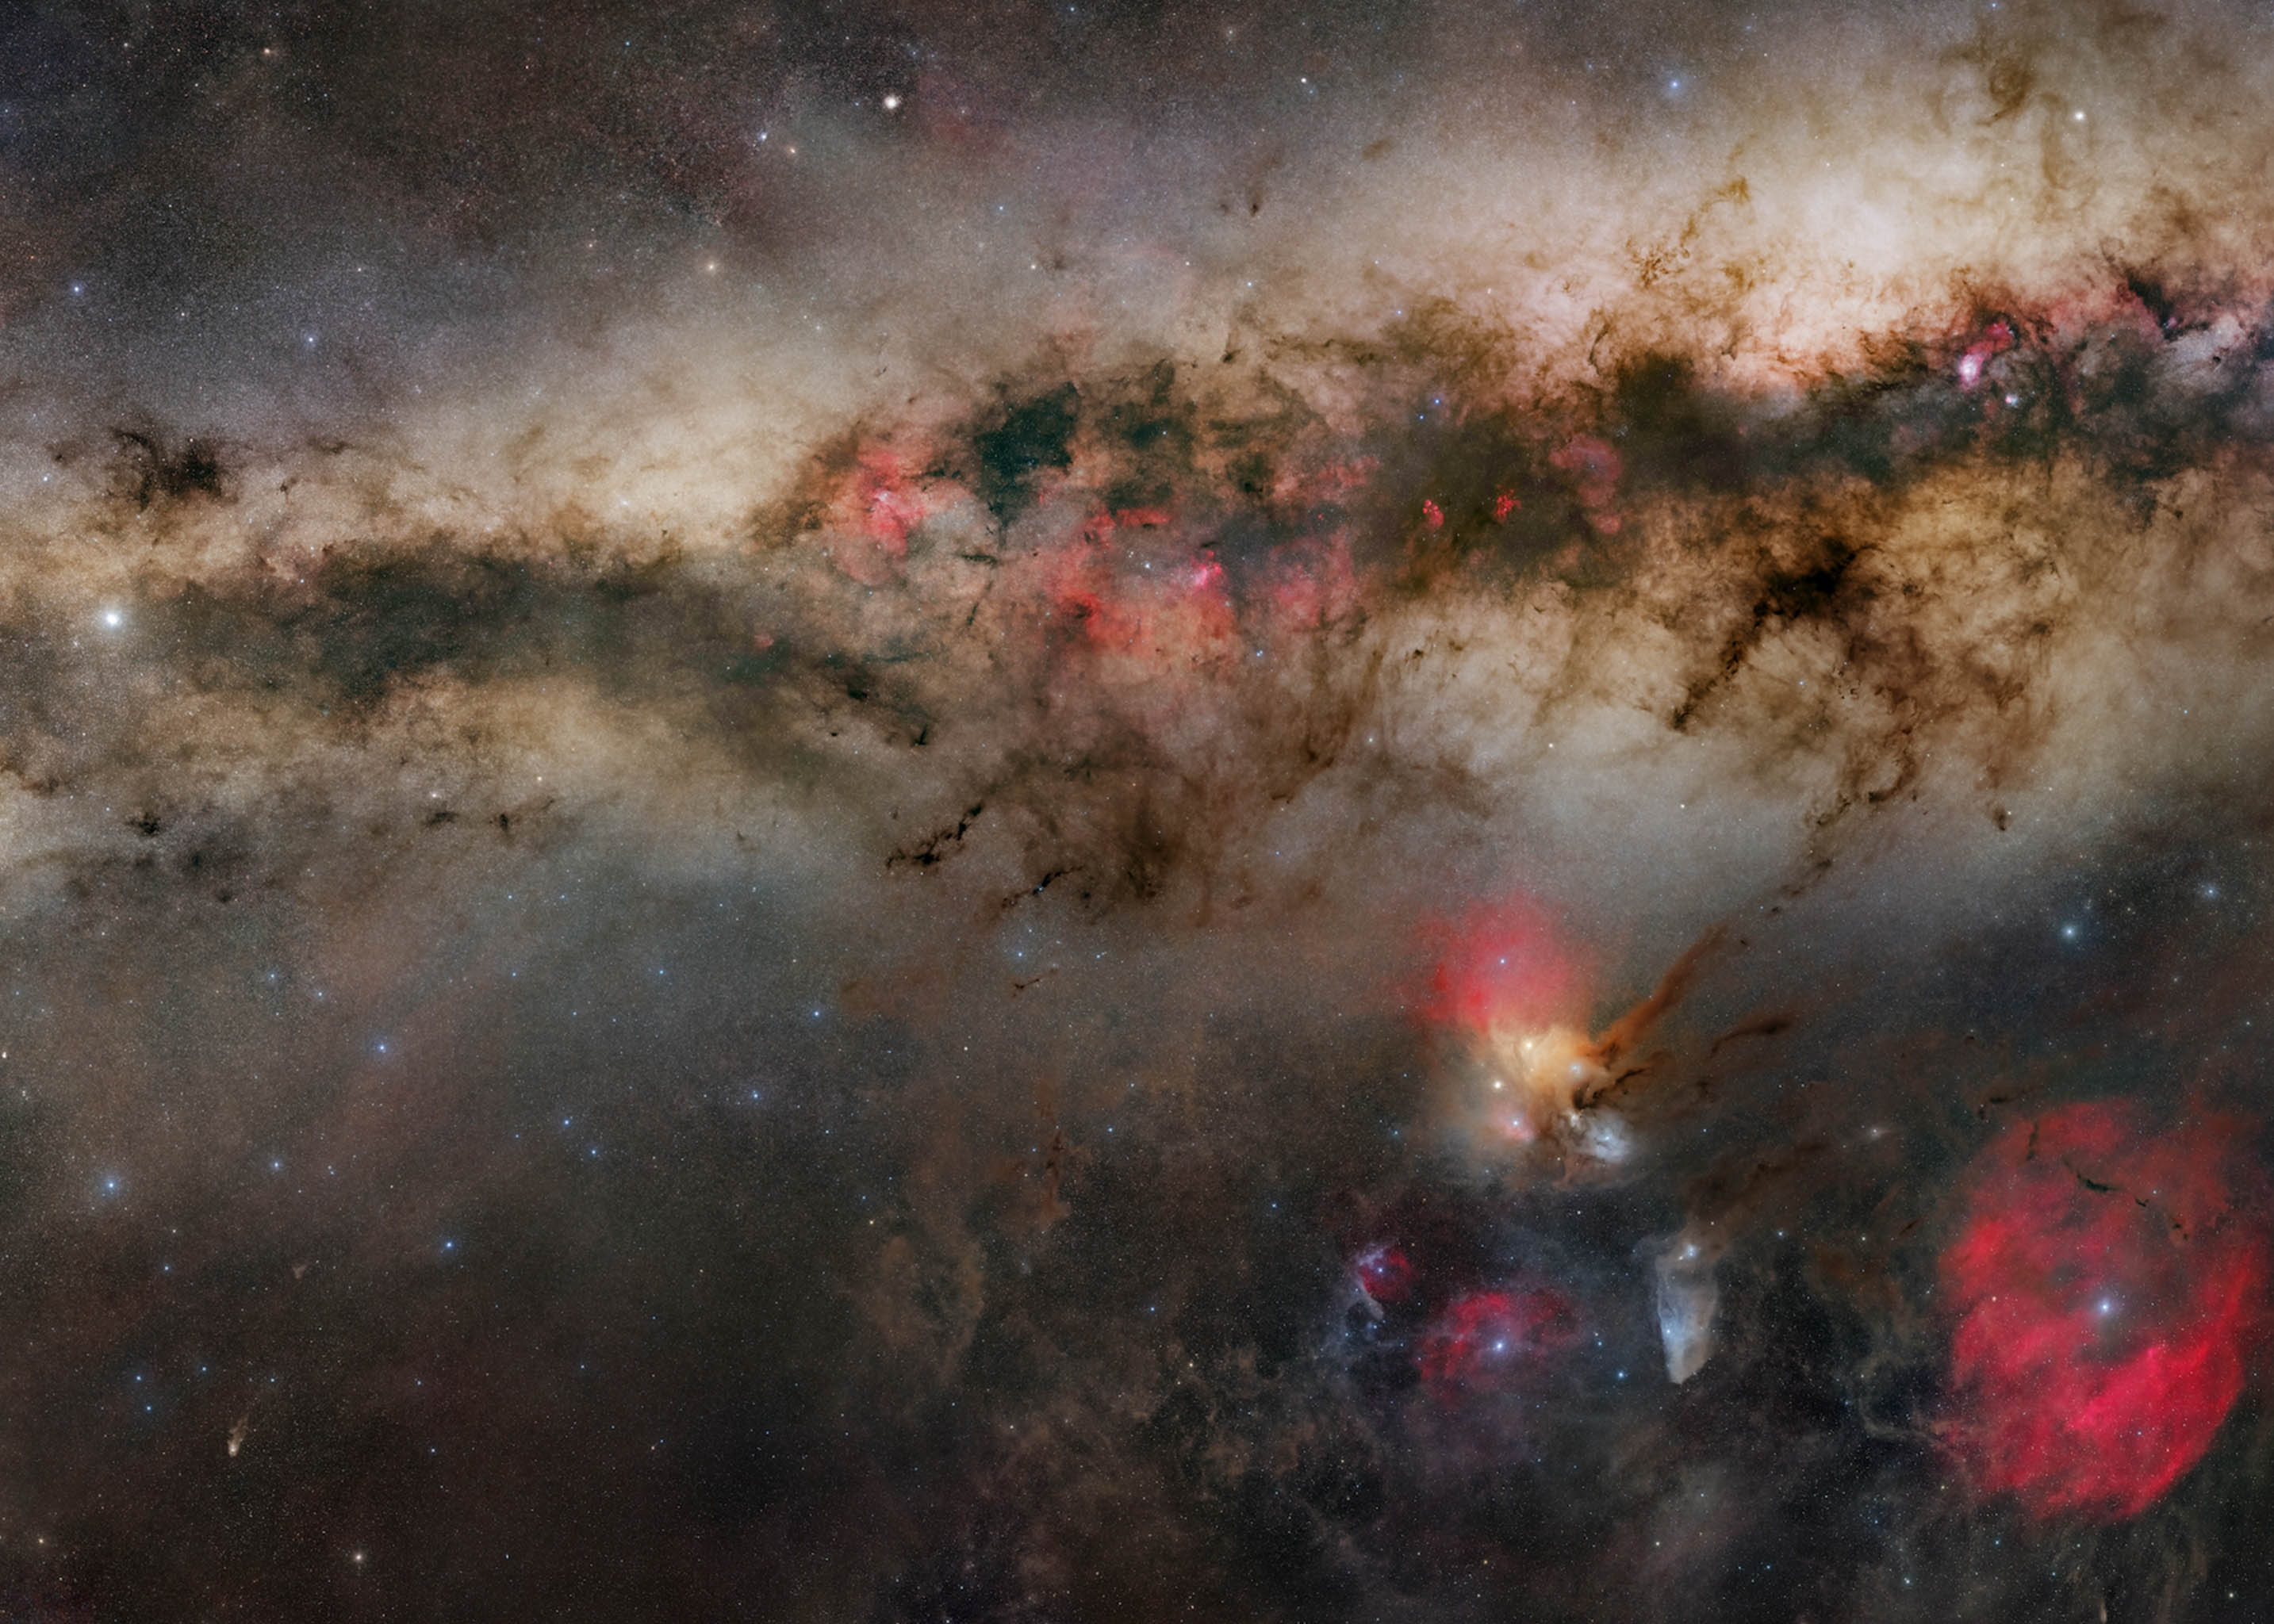 Inverted disk of the Milky Way